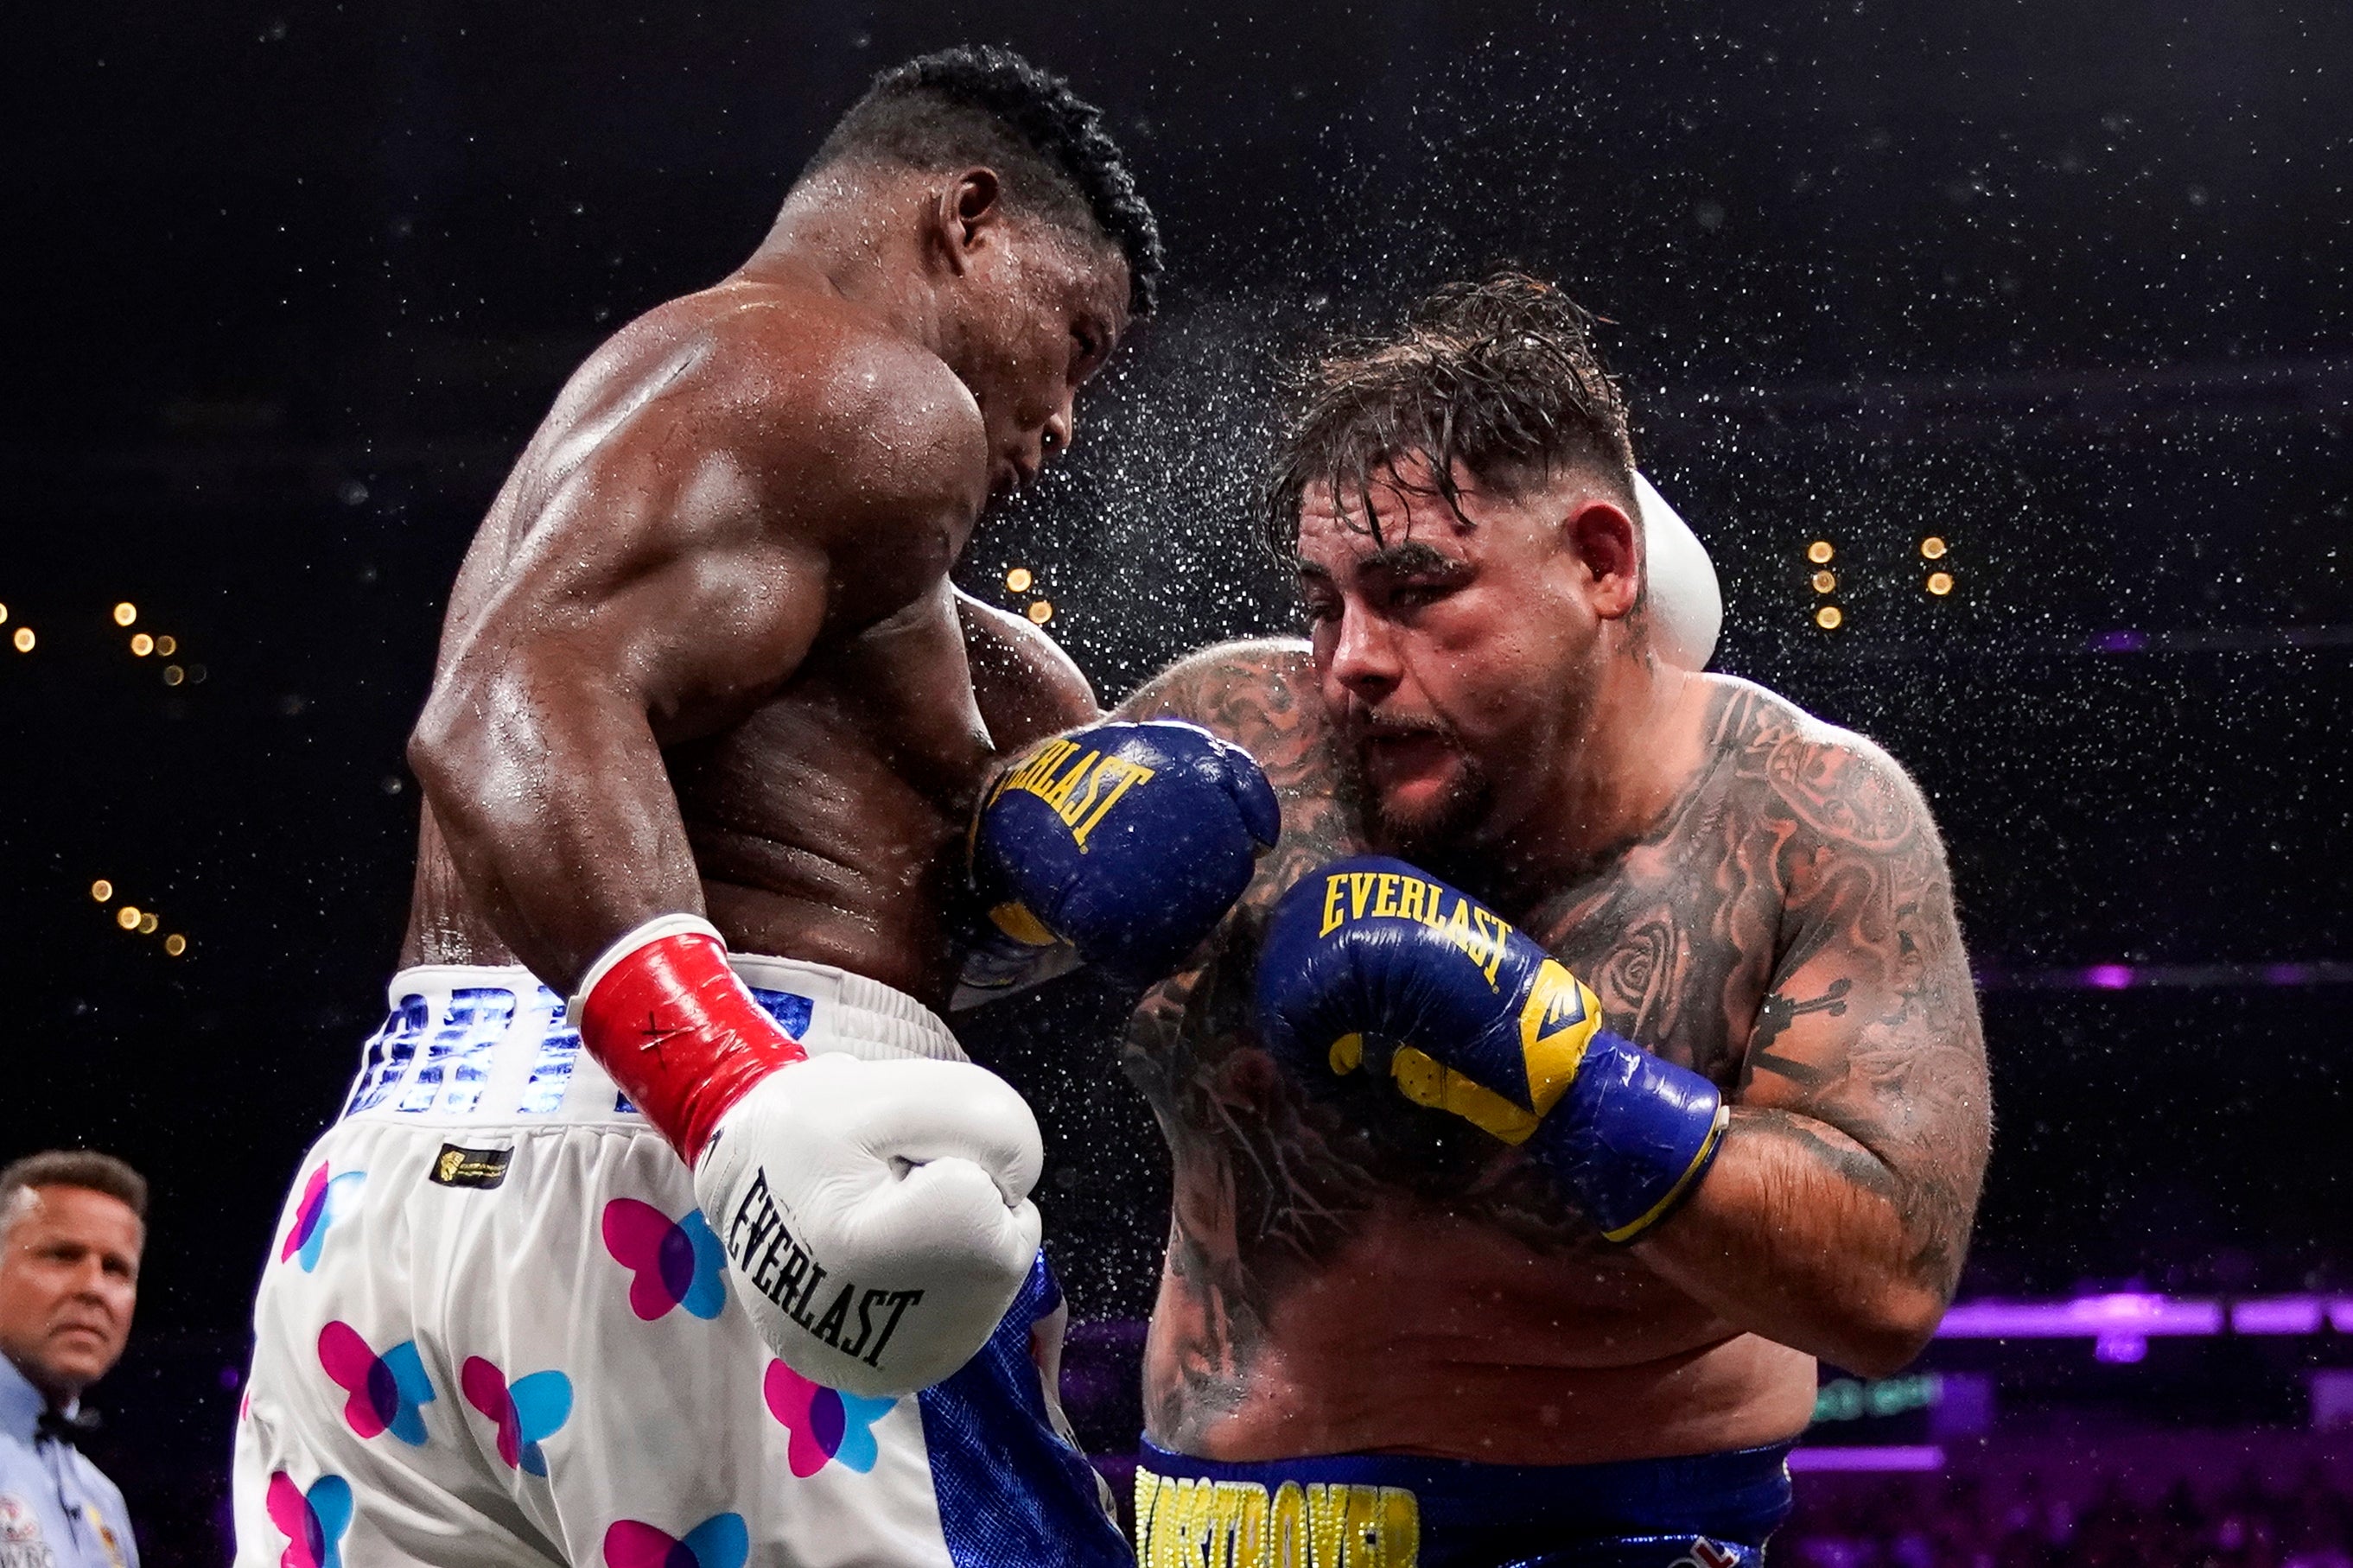 Ruiz had all of the big moments while grinding out a decision win